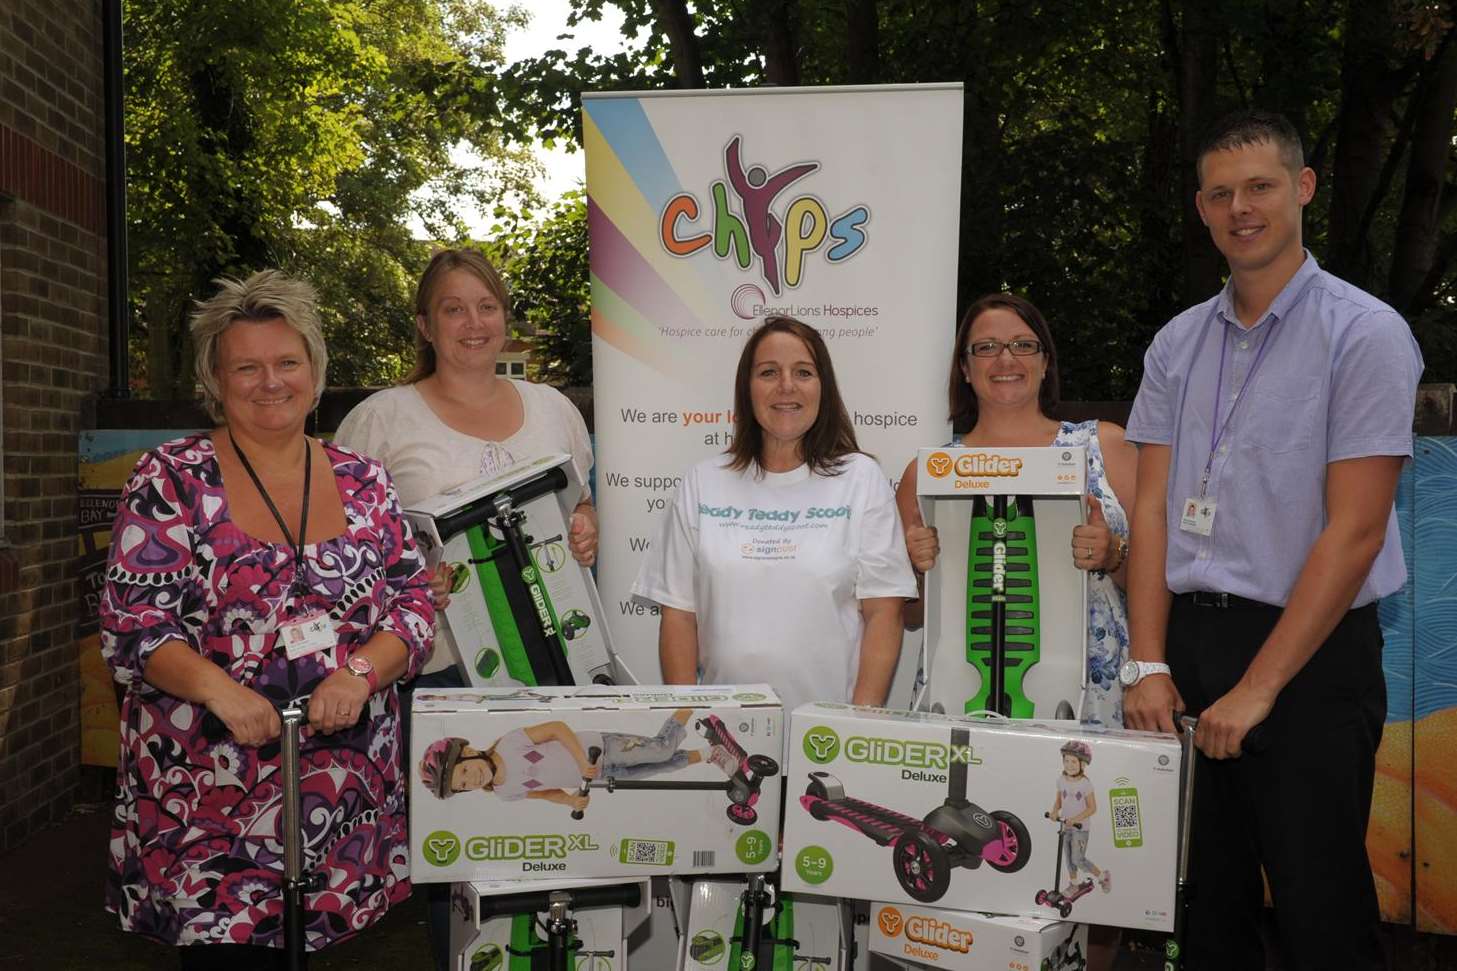 Scooters were donated to EllenorLions' chYps, with Tracie Dempster (Chyps), Jane Brennan, Sarah Johnson, Suzanne Moorcroft and Phillip Dickman (Chyps).